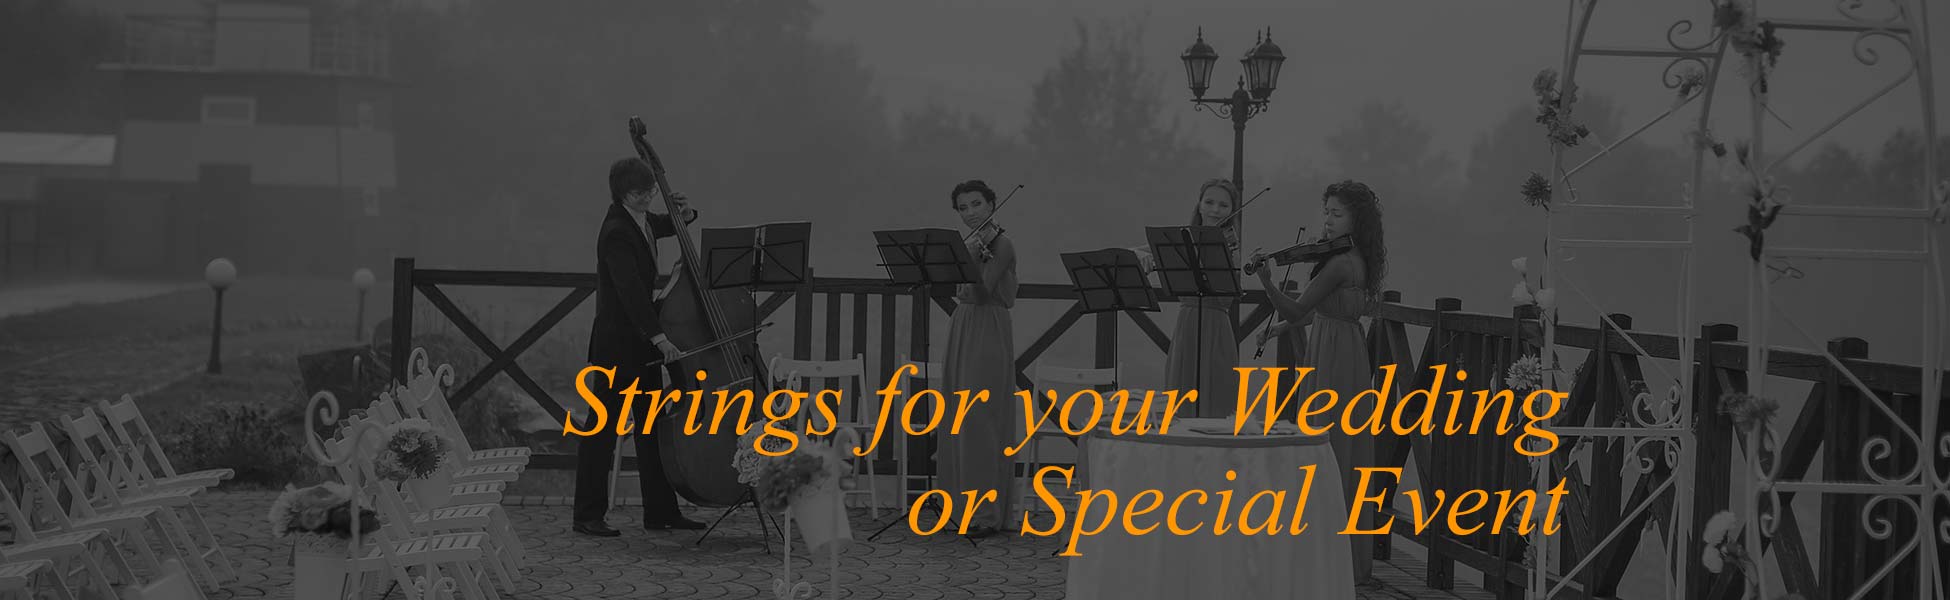 Strings for Your Heart - Weddings and Special Event